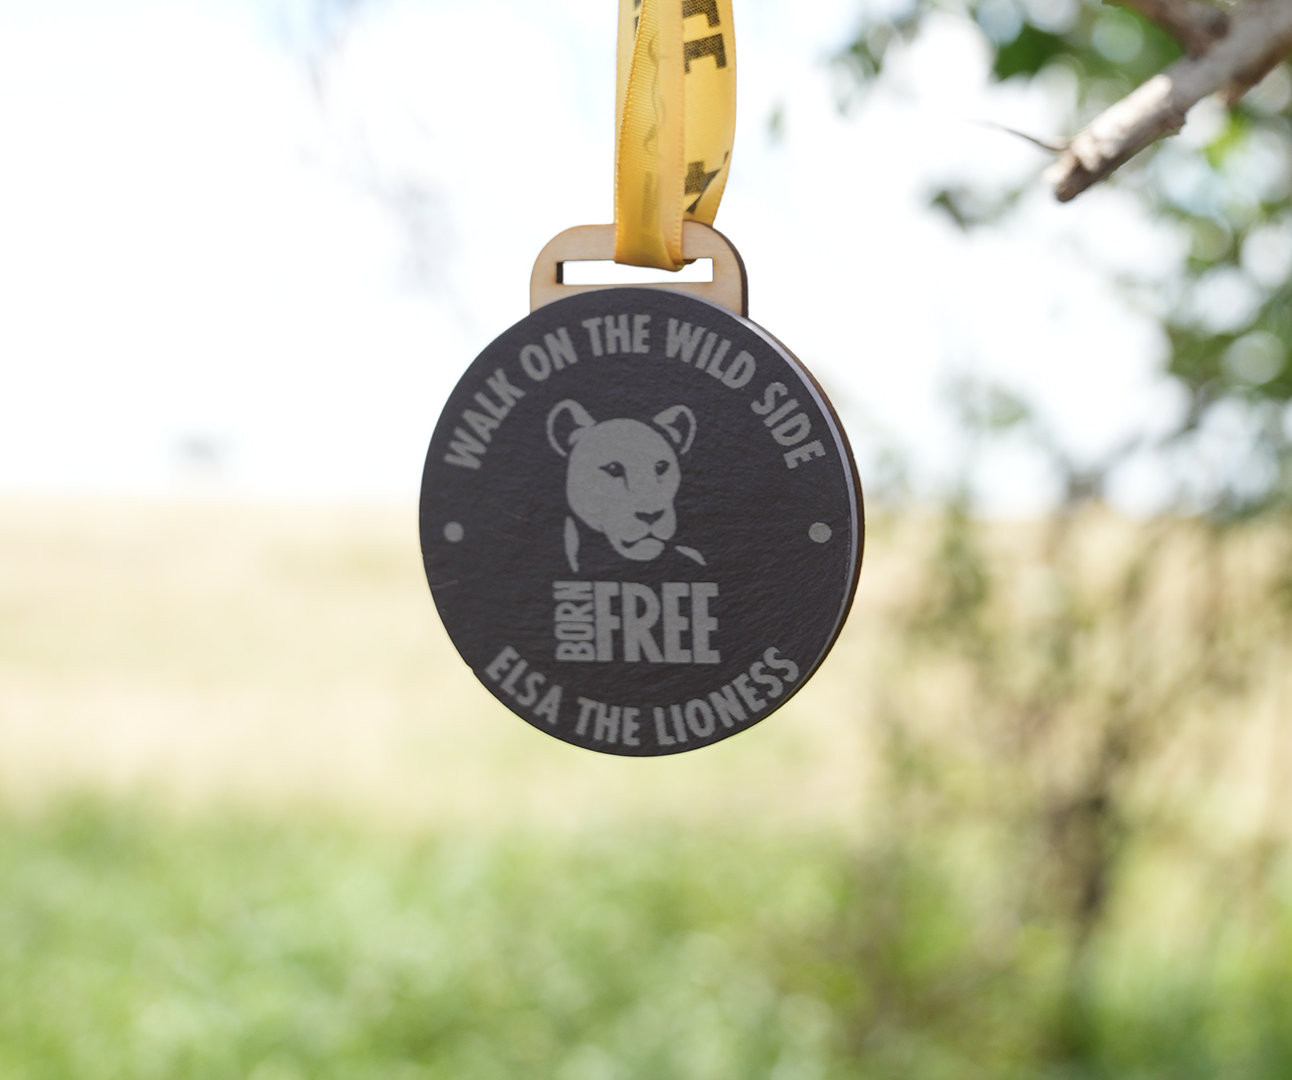 Close up of a Walk on the Wild Side medal